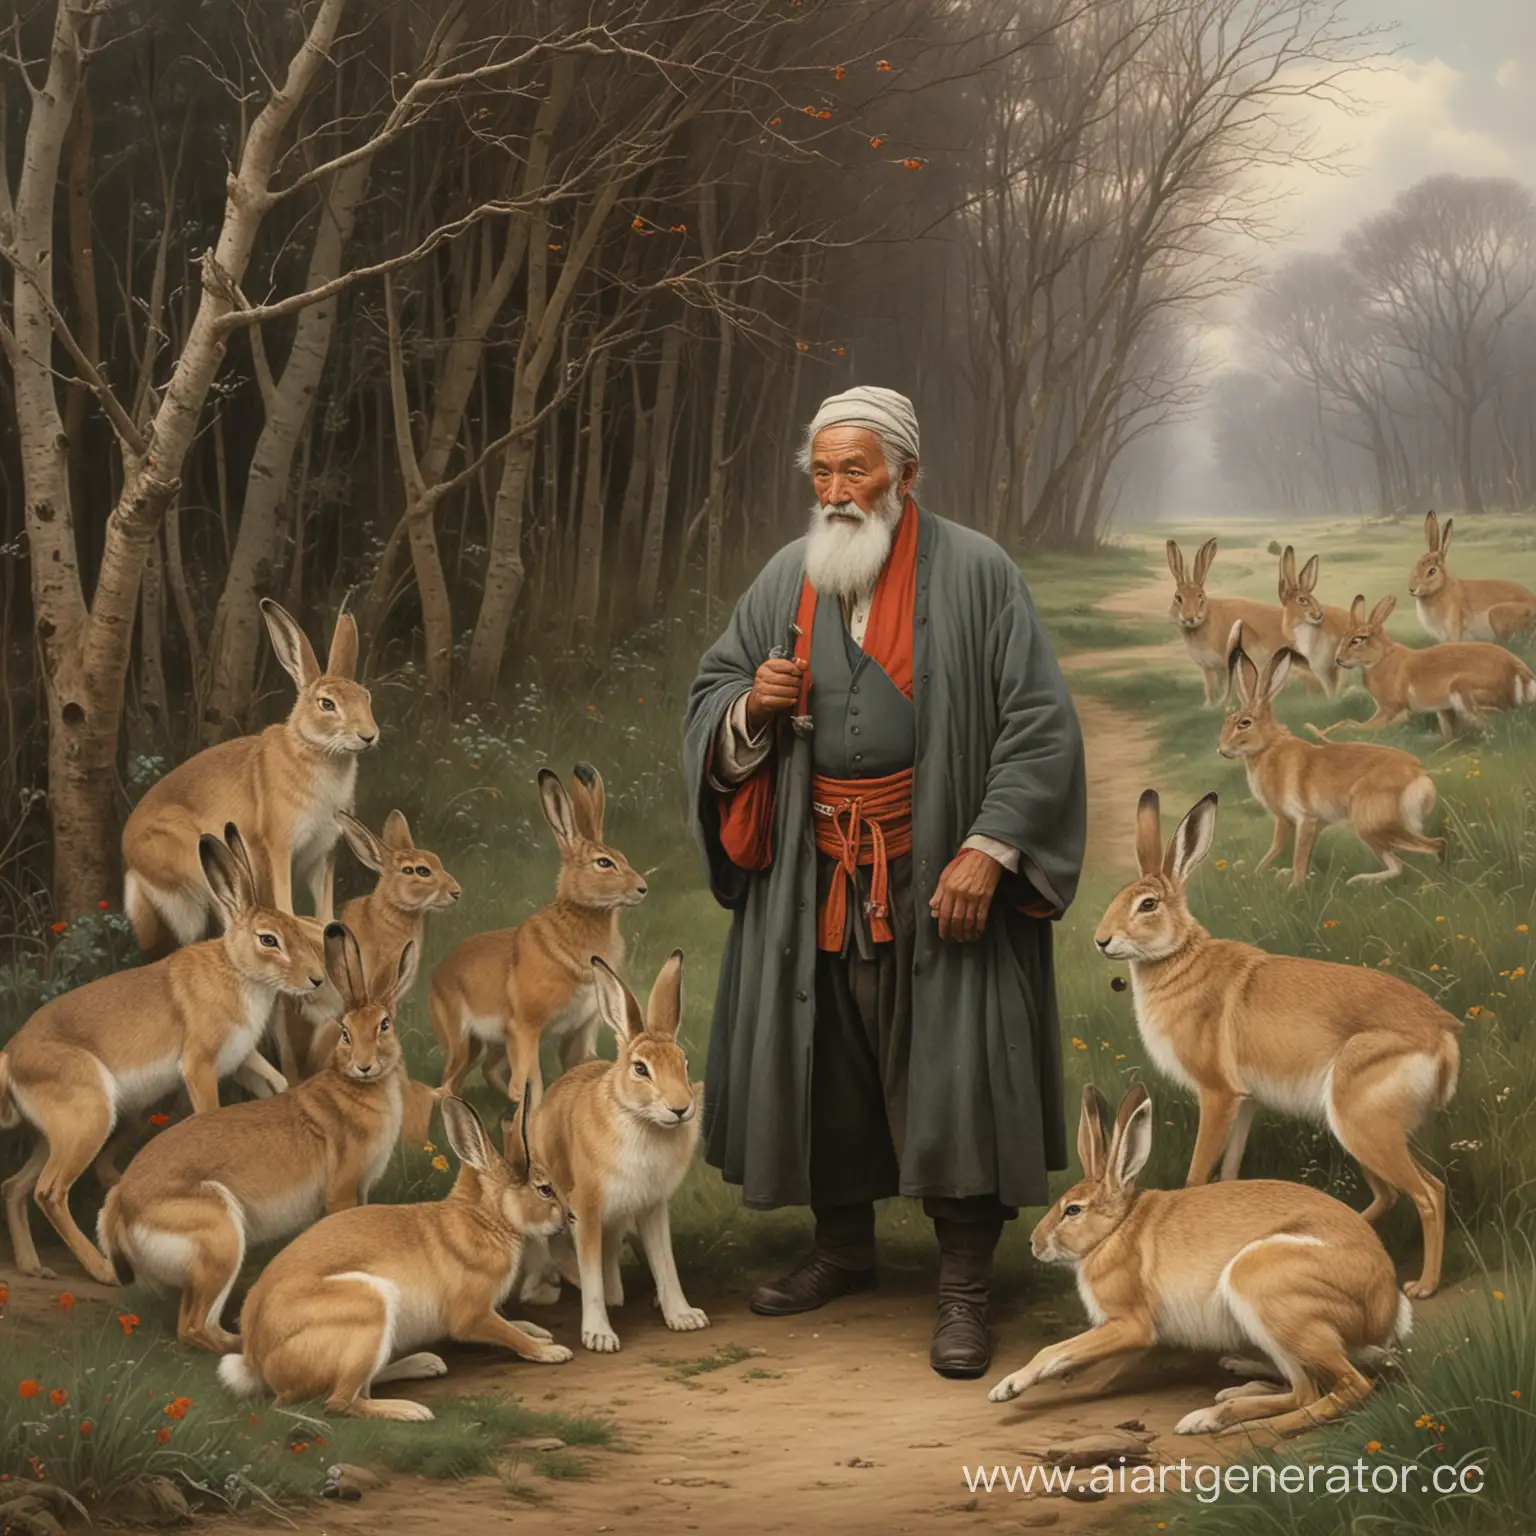 Grandfather-Mazai-and-the-Hares-in-the-Enchanted-Forest